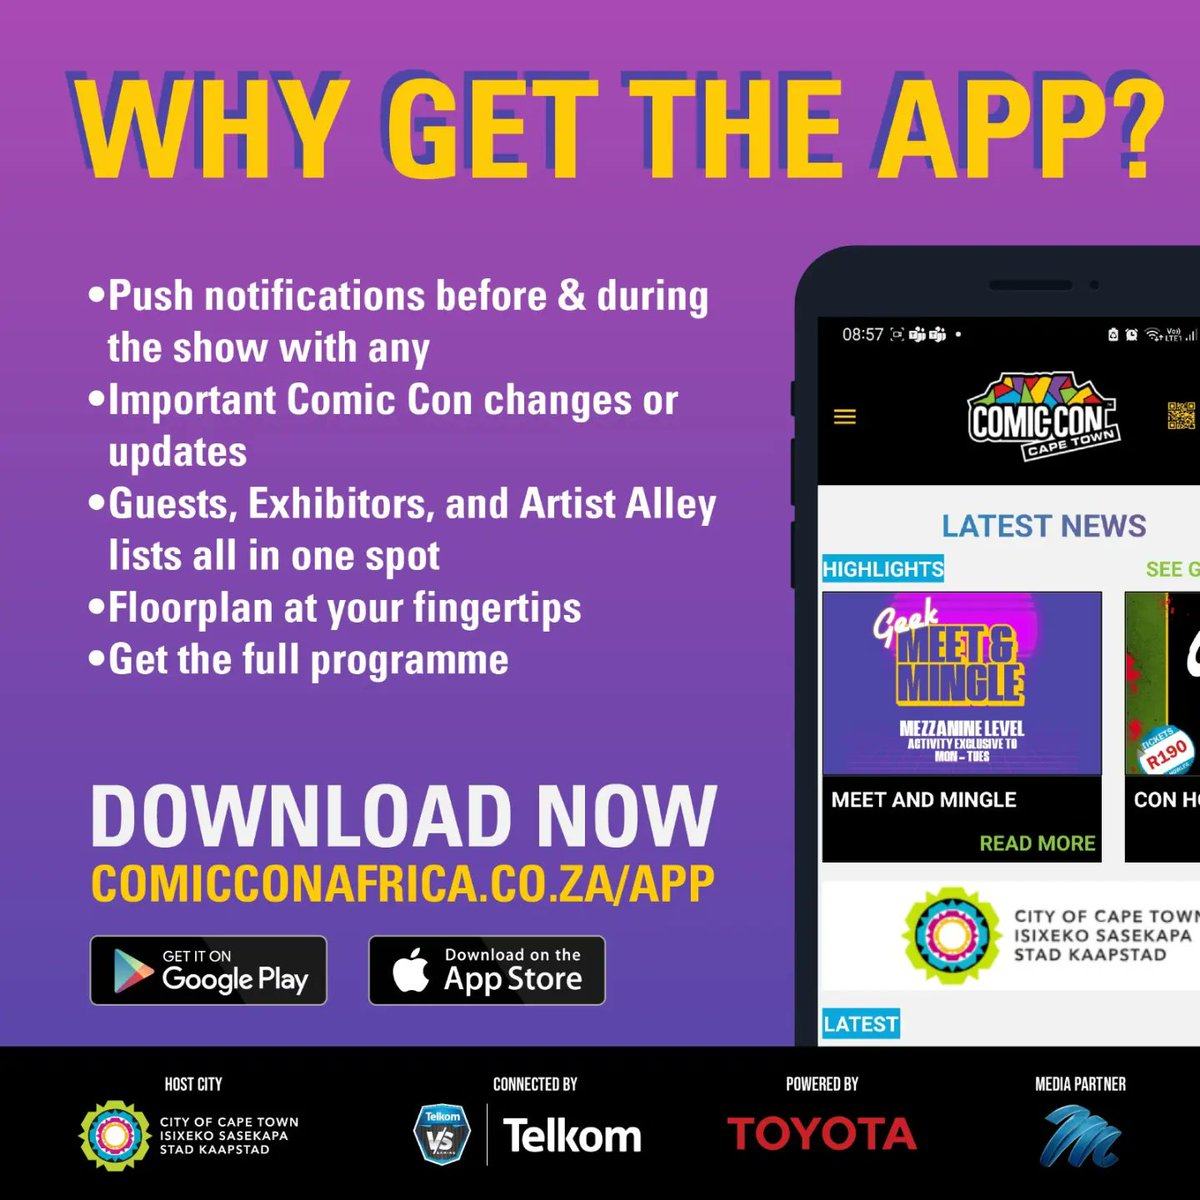 Stay App to date! HMU on the #CCCT Mobile App📱 Download now on Play store or App Store to see full CON programme, recap on announced talent, plan your CON days and get show updates and alerts. *trust me you are going to need the APP for all info on what's on the Con floor 😉